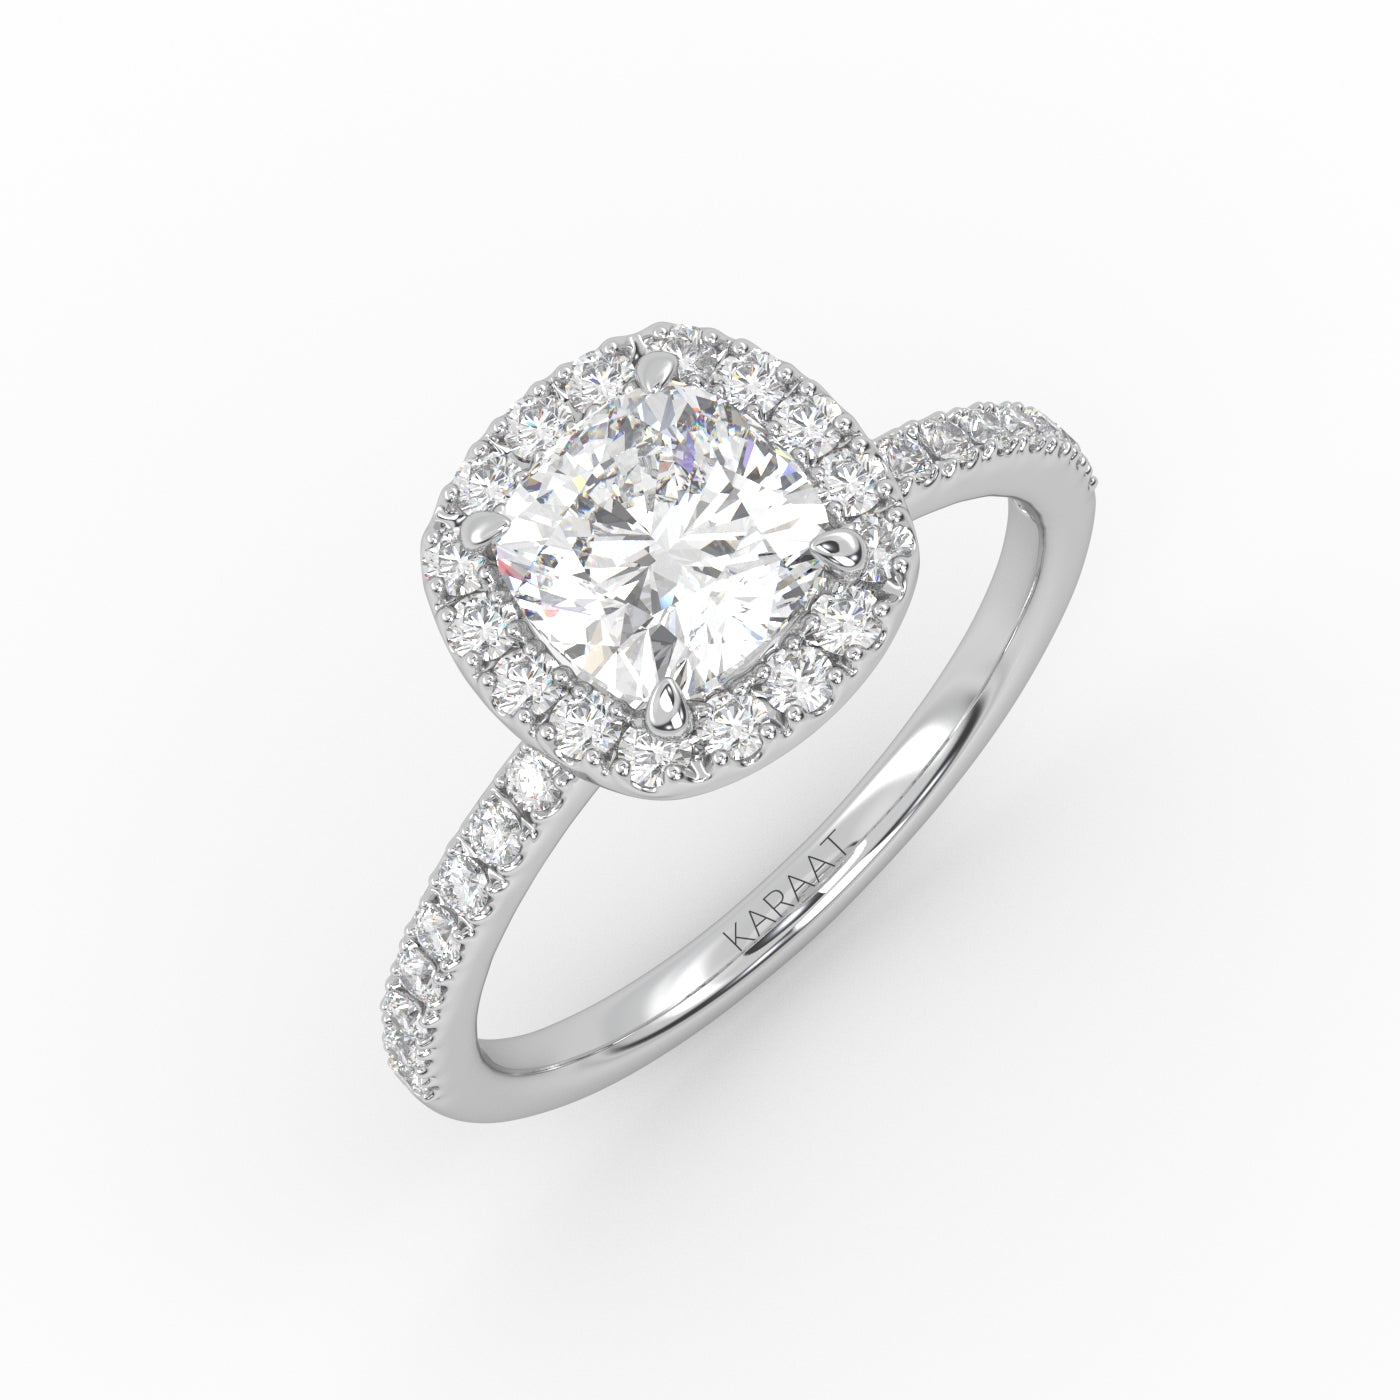 Elegant cushion-cut diamond solitaire engagement ring in white gold with a diamond Pavé band and Halo design.   